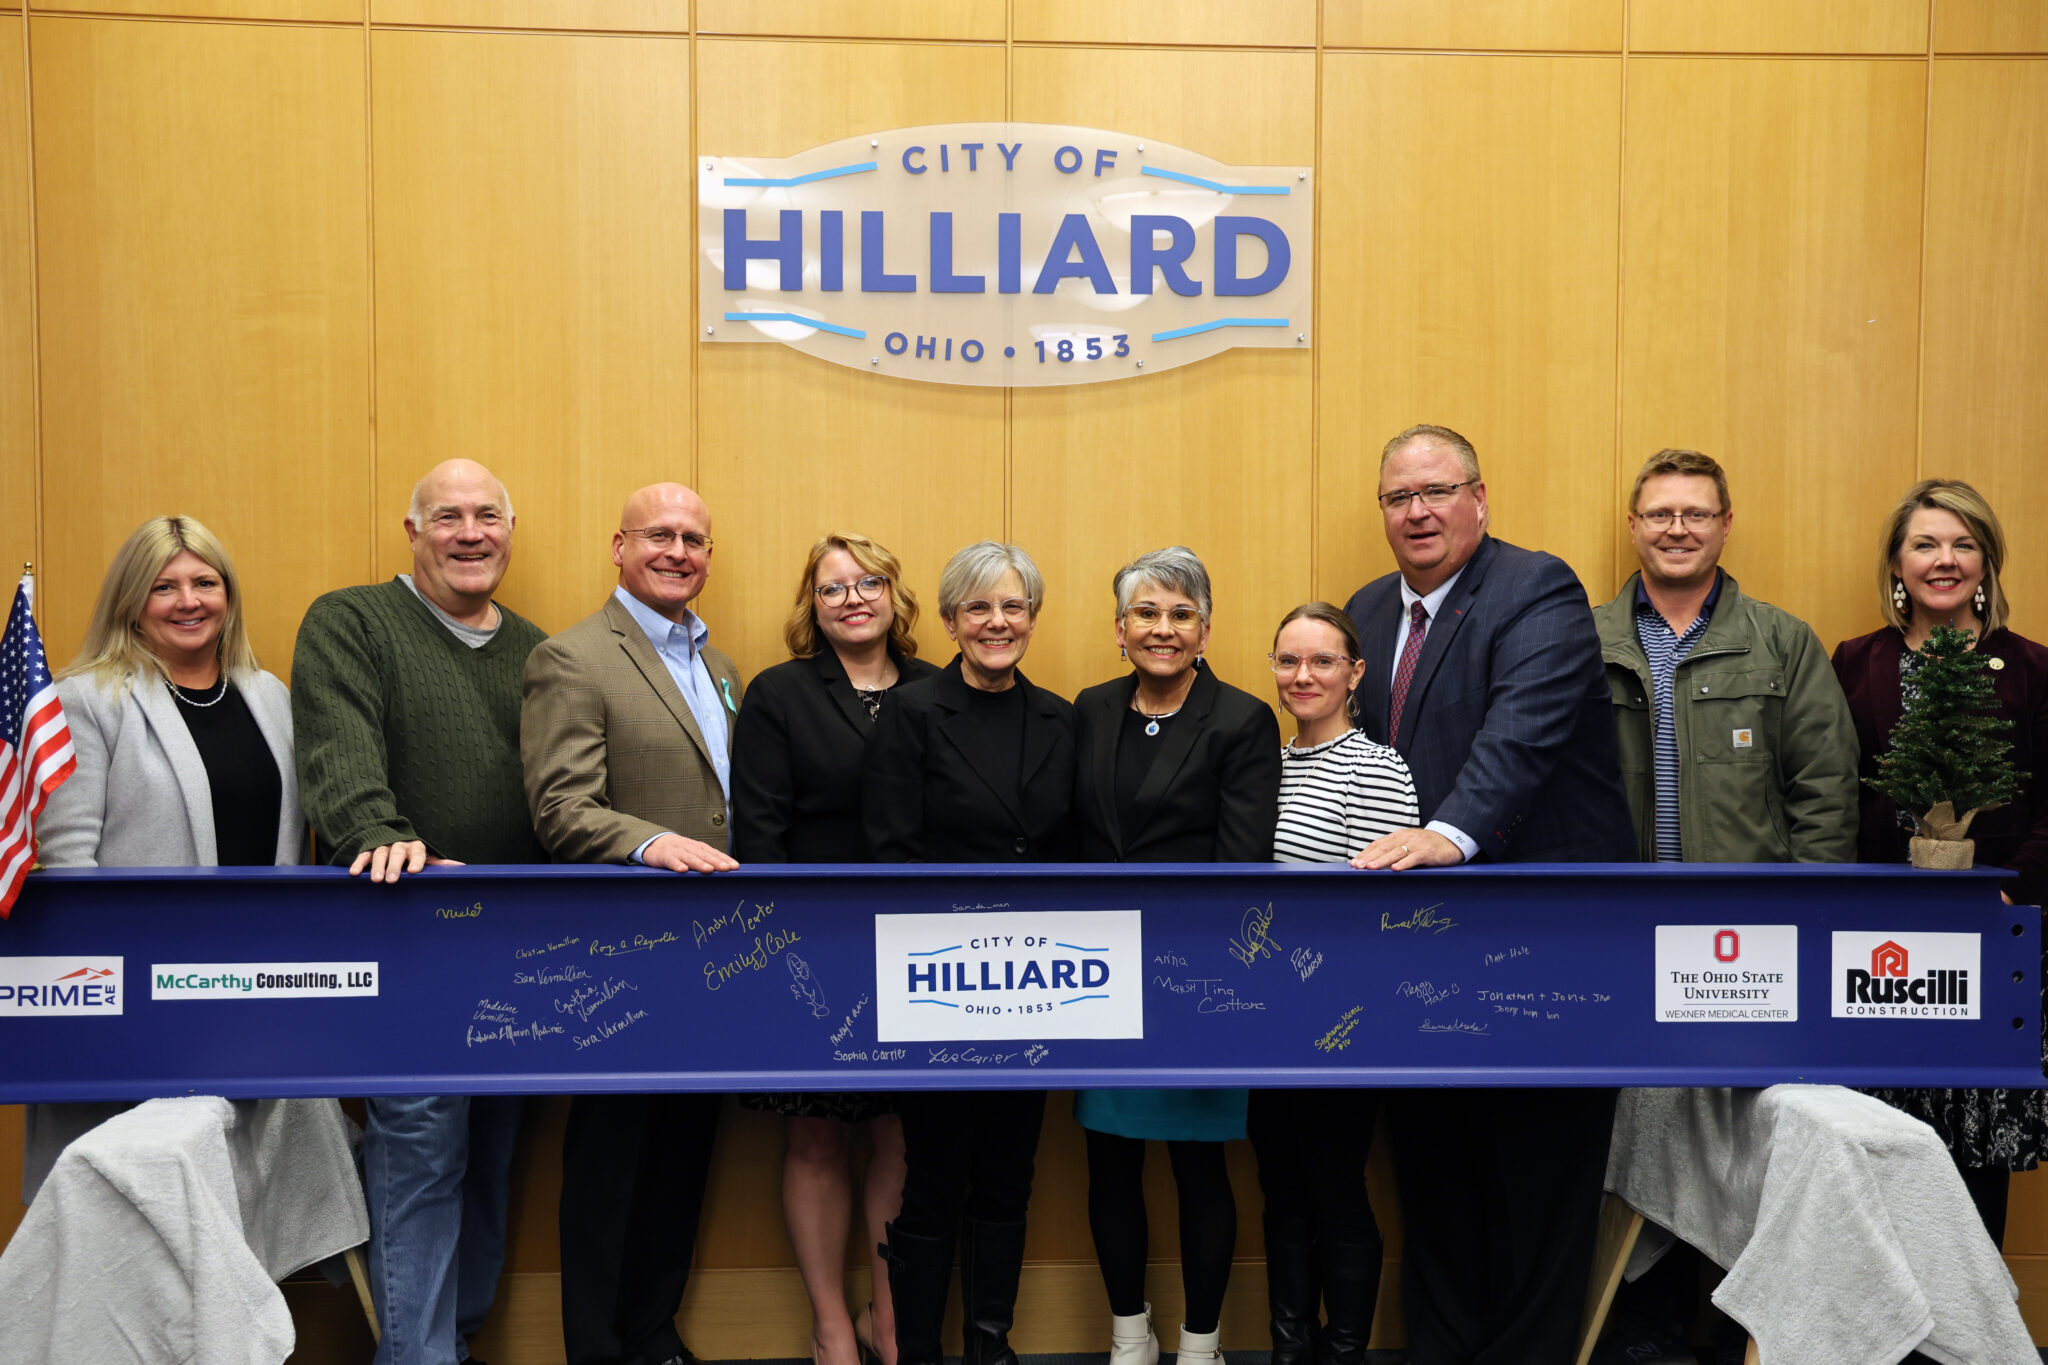 The City of Hilliard Real People, Real Possibilities